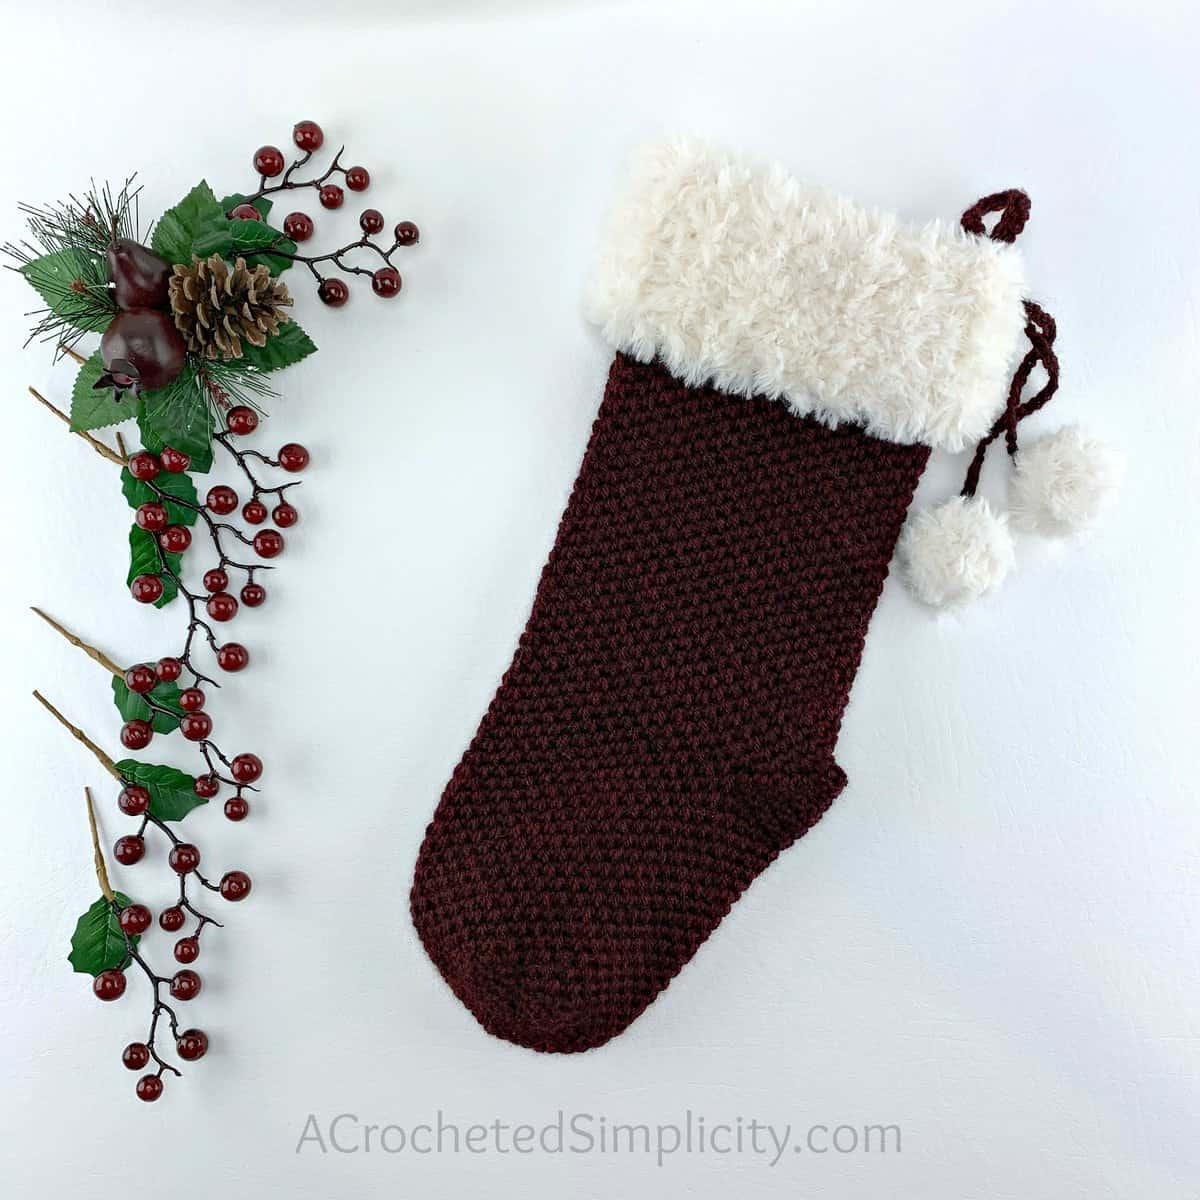 Free Crochet Pattern - Classic Textures Christmas Stocking by A Crocheted Simplicity#freecrochetstockingpattern #freecrochetpattern #crochetchristmas #christmasstockingpattern #crochet #handmadestocking